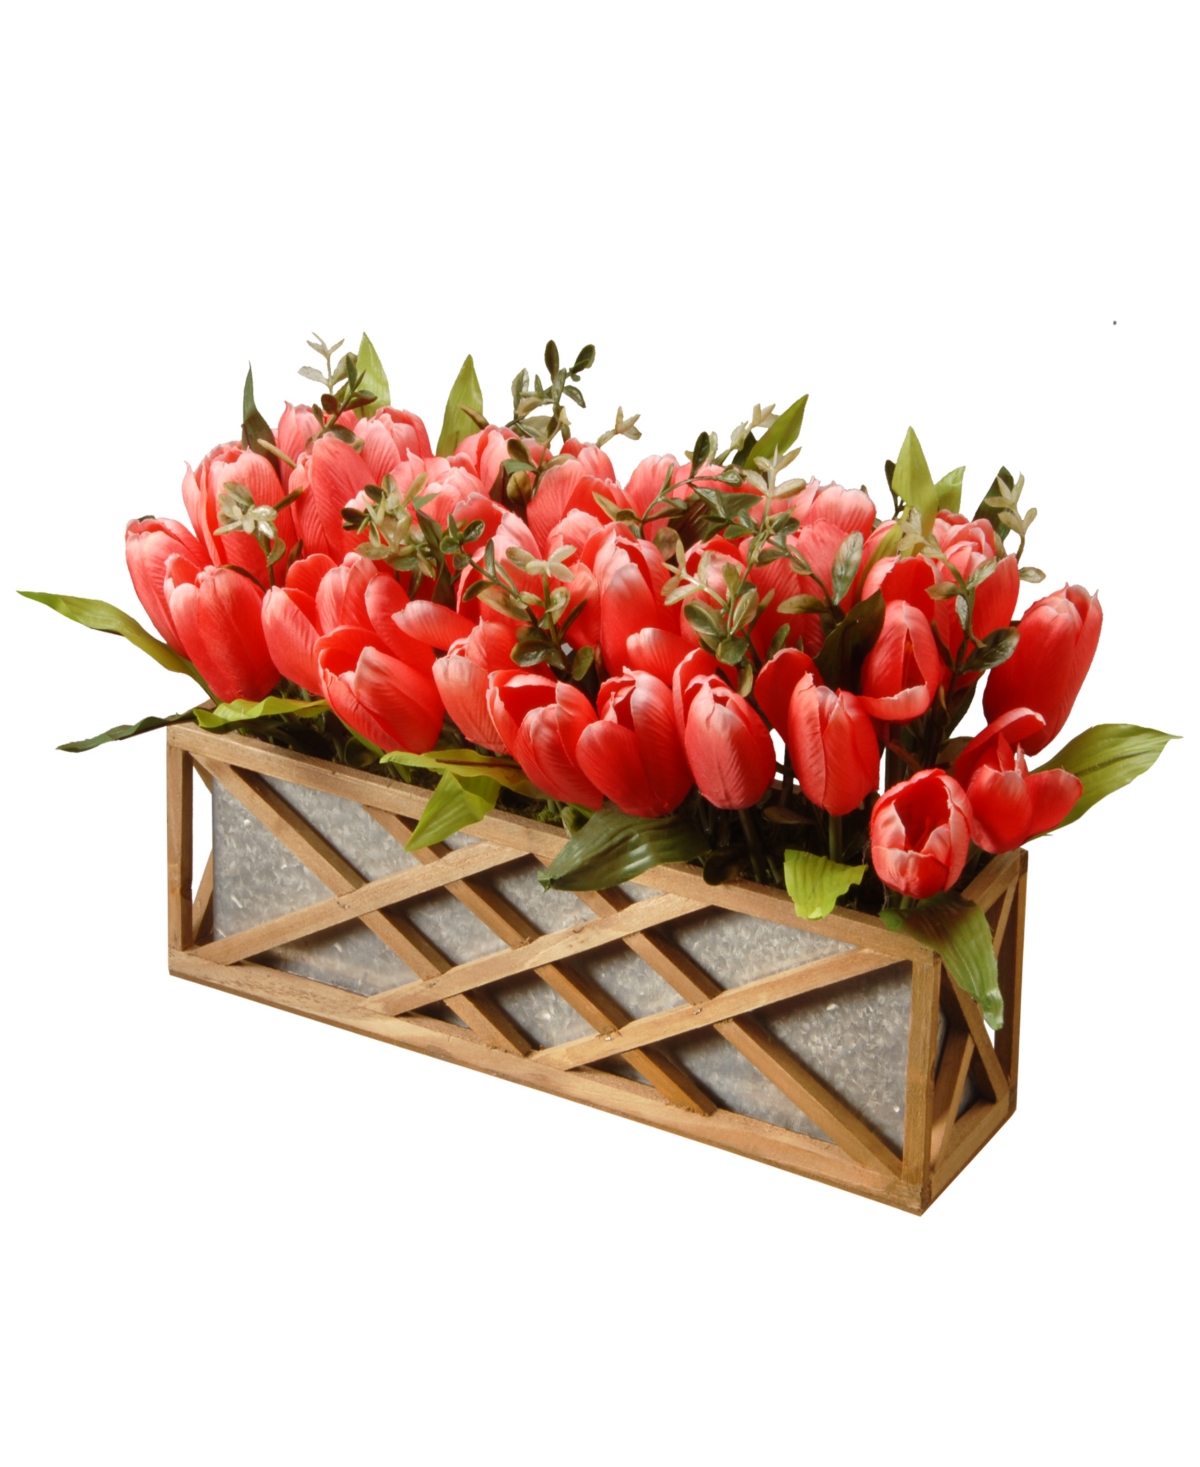 20 Planter with Pink Tulips - Red